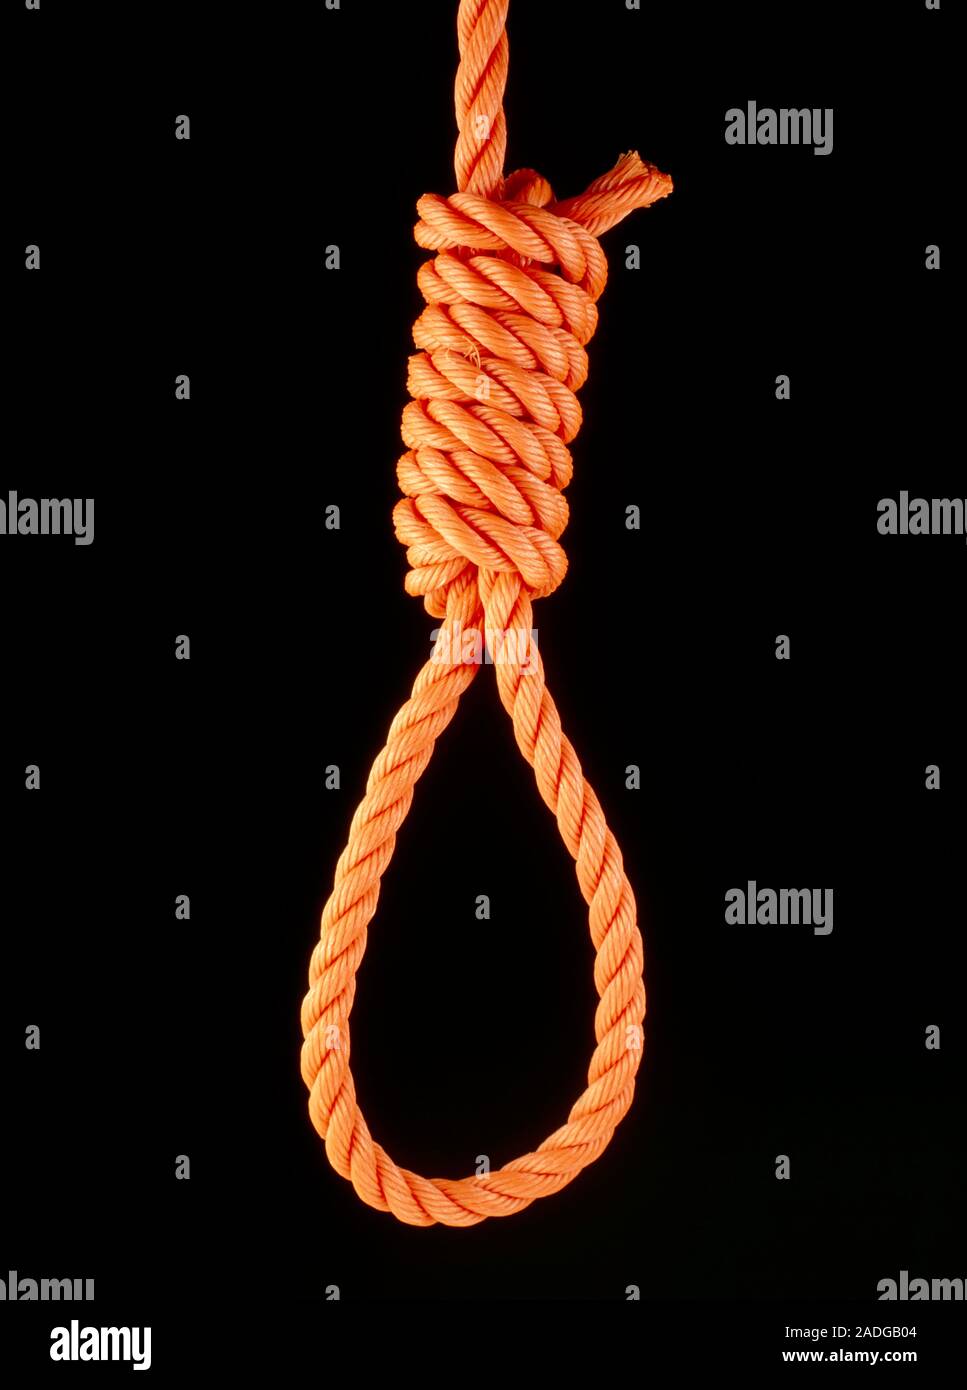 A hangman's noose, also known as Jack Ketch's knot; a very strong